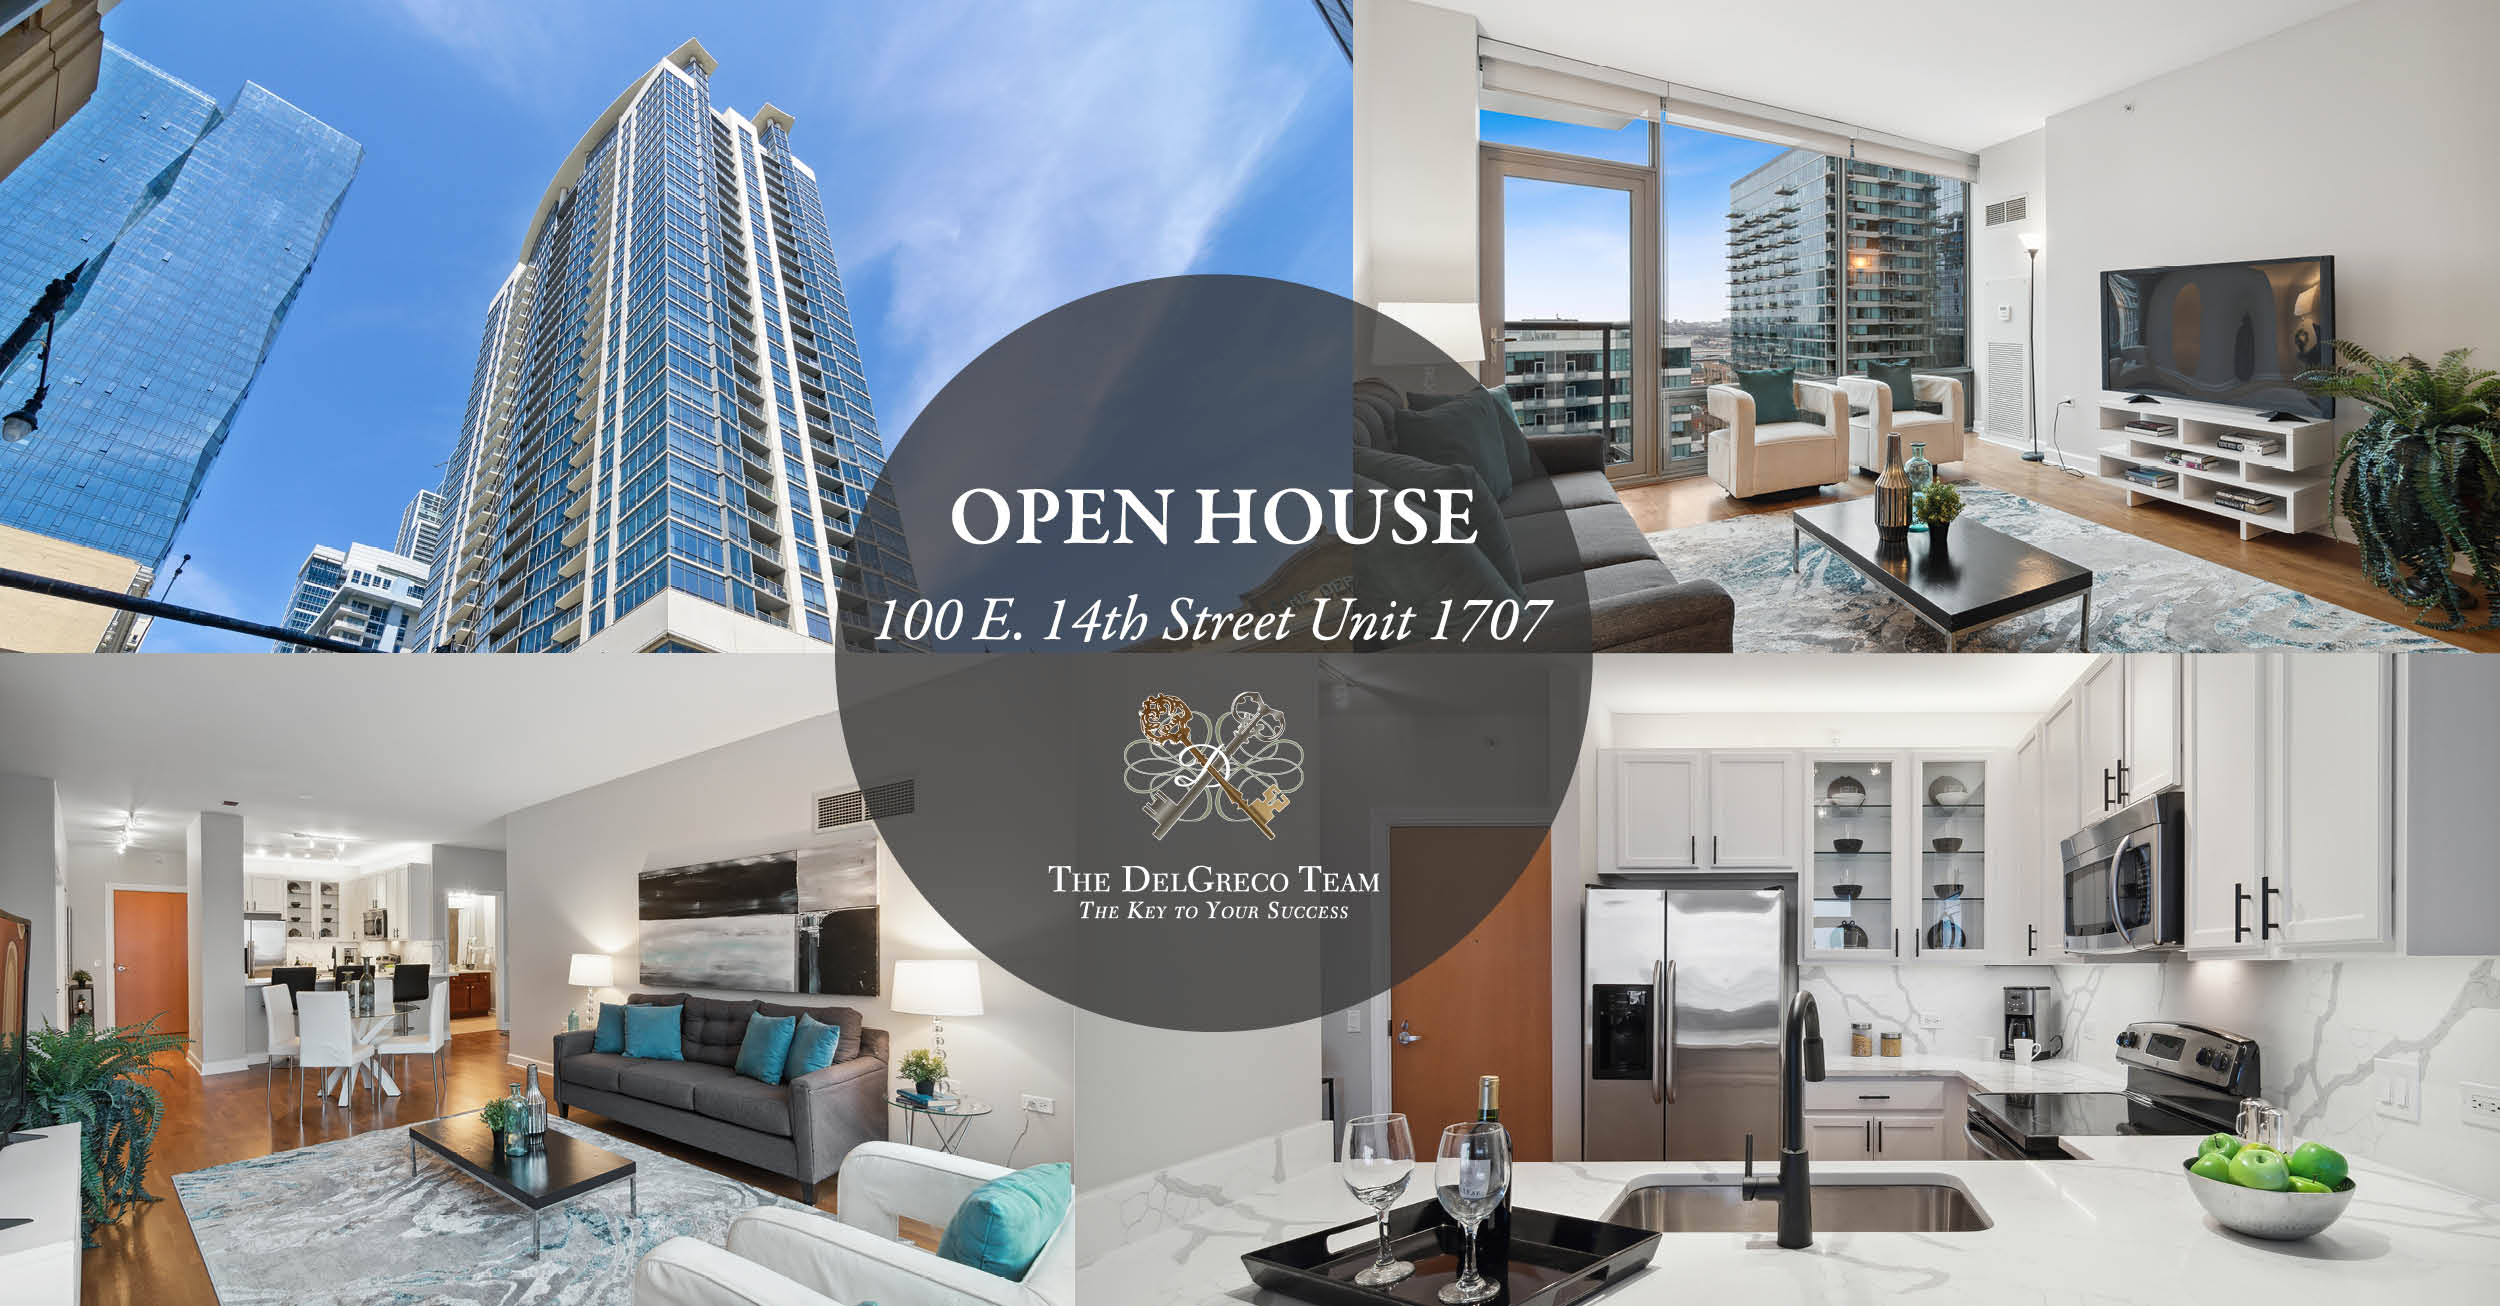 South Loop - 100 East 14th Street Unit 1707, Chicago, IL 60605 - Open House